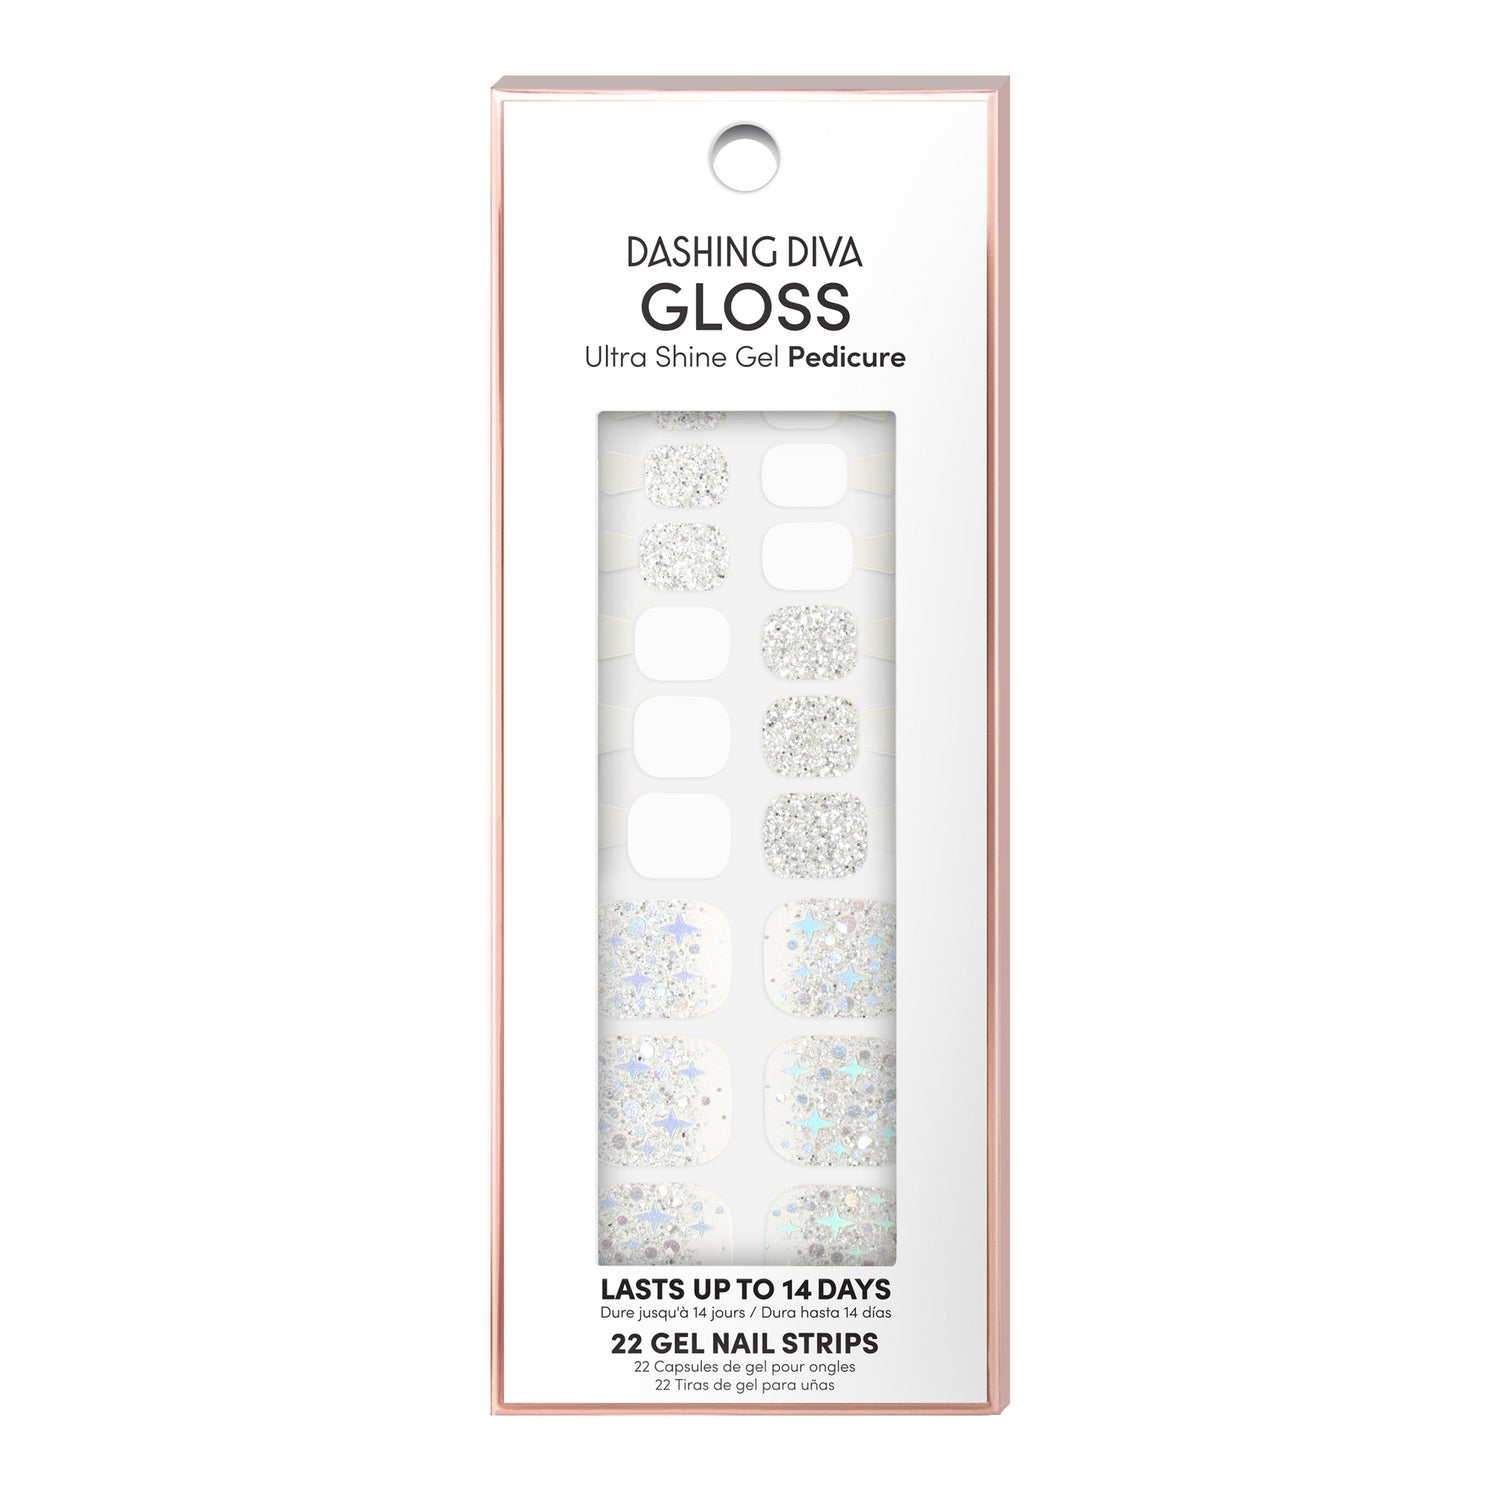 Dashing Diva GLOSS Pedicure white and silver glitter gel pedi strips with sheer glitter accents.